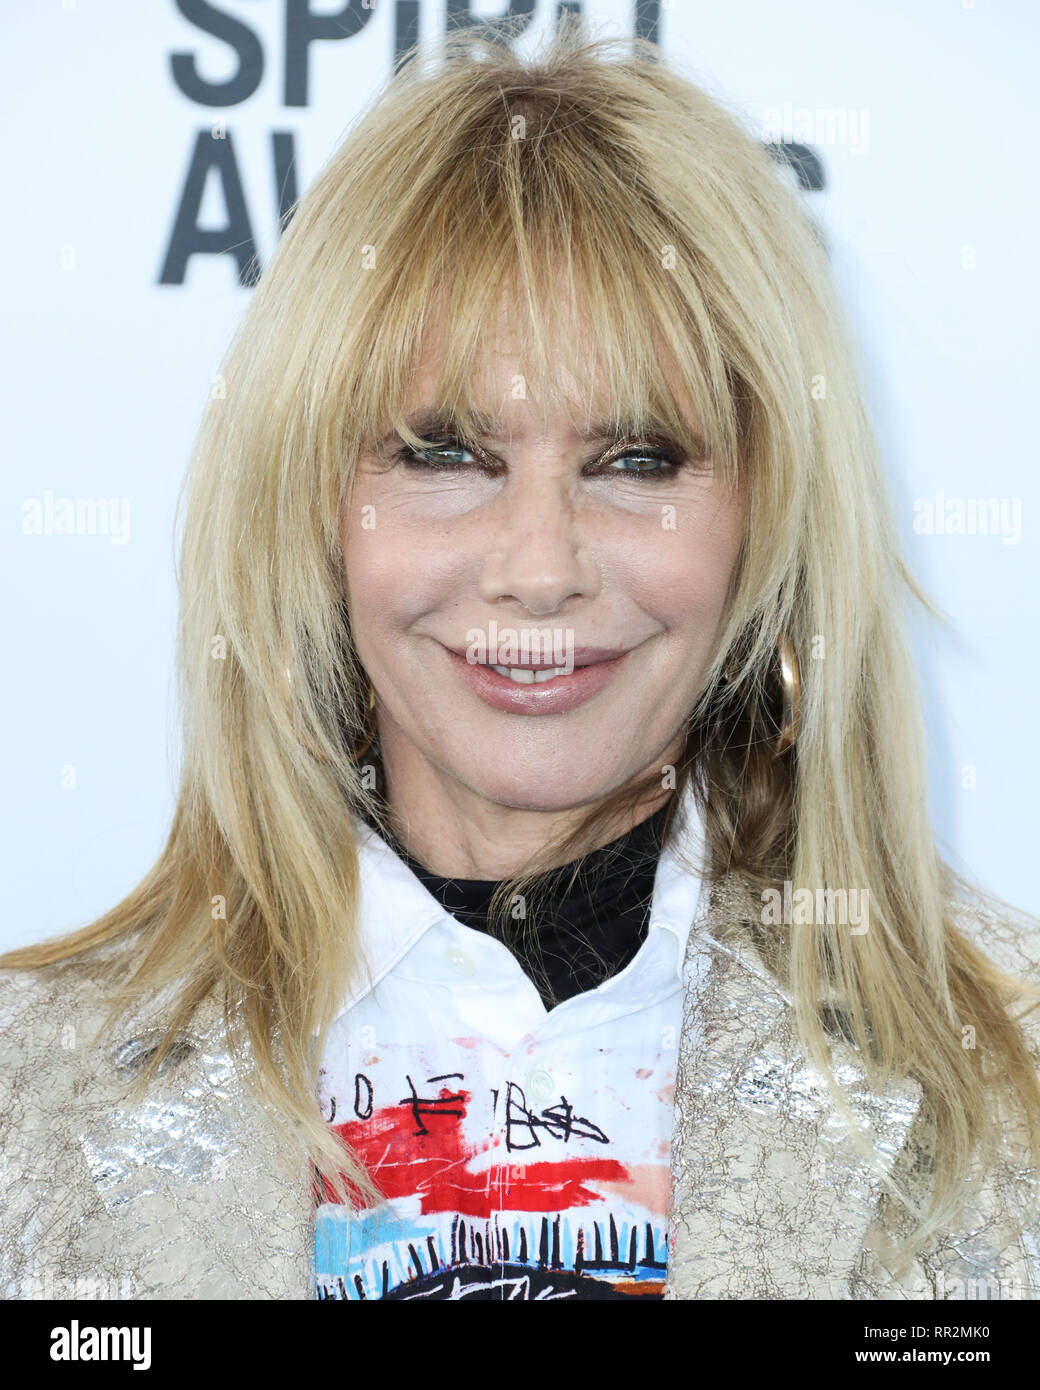 SANTA MONICA, LOS ANGELES, CA, USA - FEBRUARY 23: Actress Rosanna Arquette arrives at the 2019 Film Independent Spirit Awards held at the Santa Monica Beach on February 23, 2019 in Santa Monica, Los Angeles, California, United States. (Photo by Xavier Collin/Image Press Agency) Stock Photo